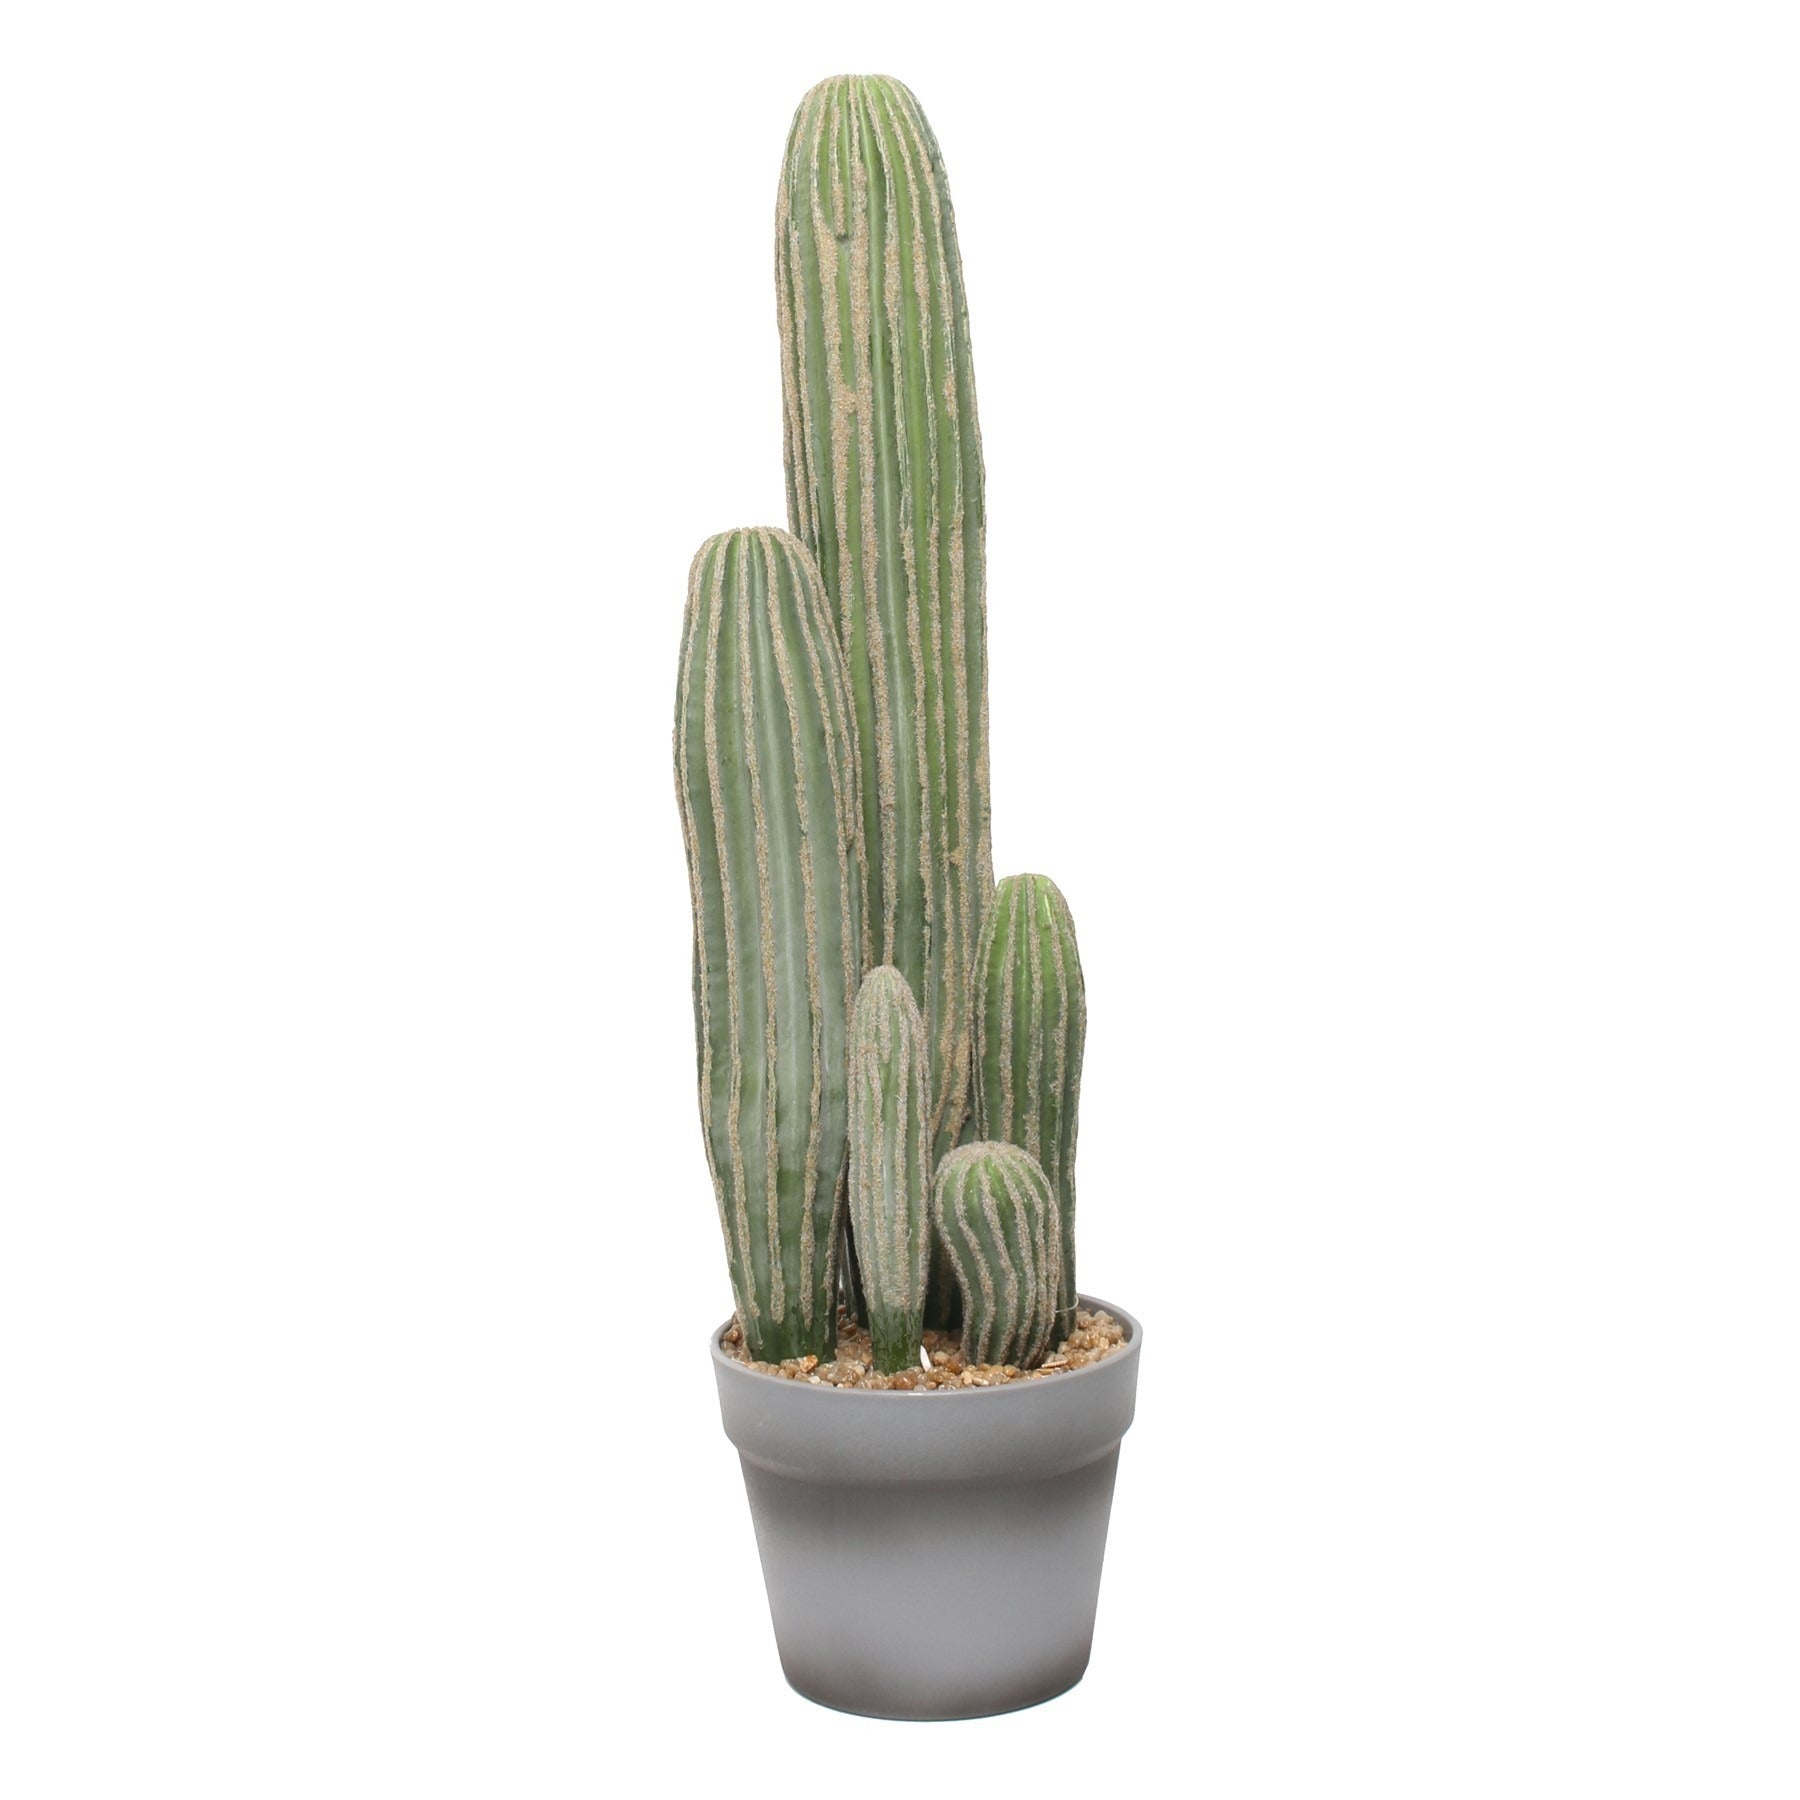 View Artificial Potted Cactus 23inch information